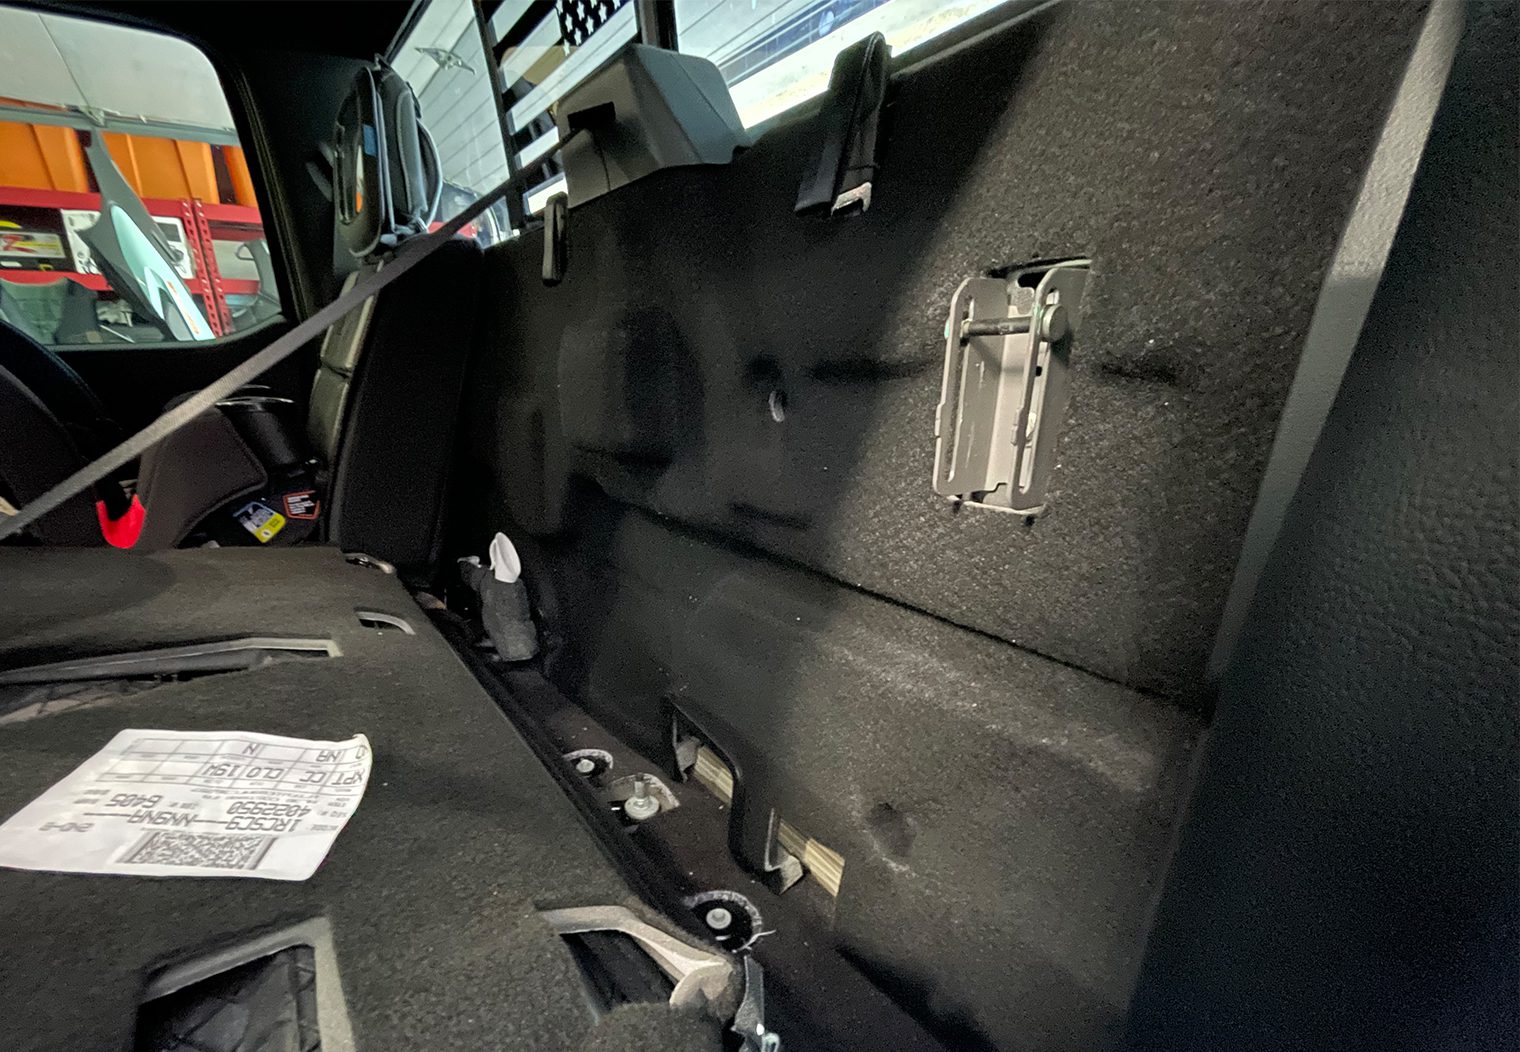 2021 Ford F-150 Amp Rack Location Behind Seat